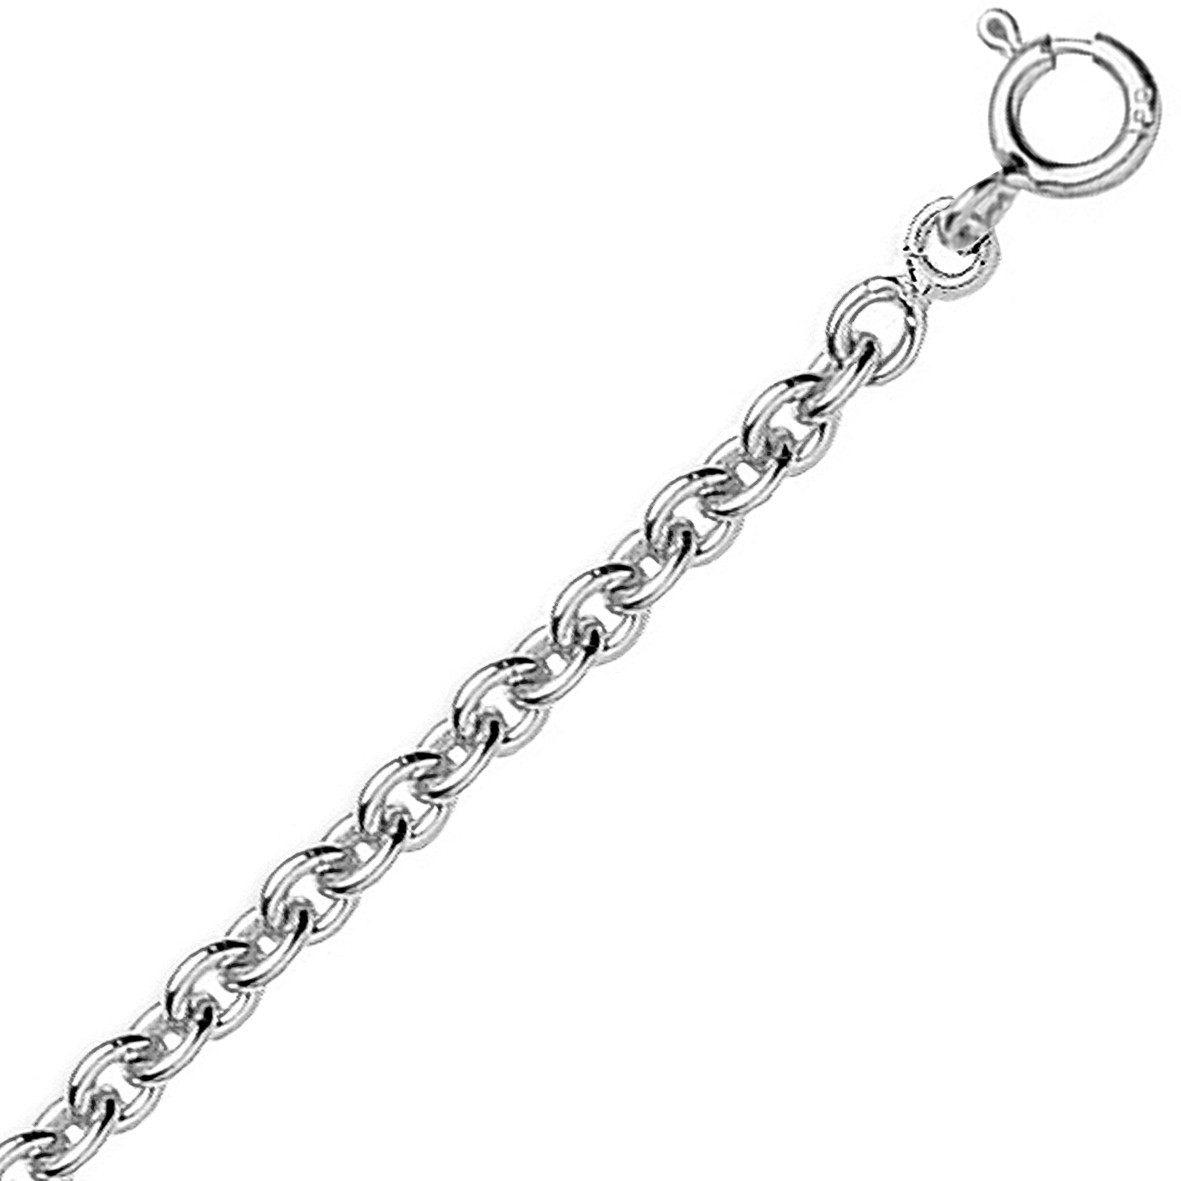 Chaine or blanc 18k maille forçat ronde 1,64mm